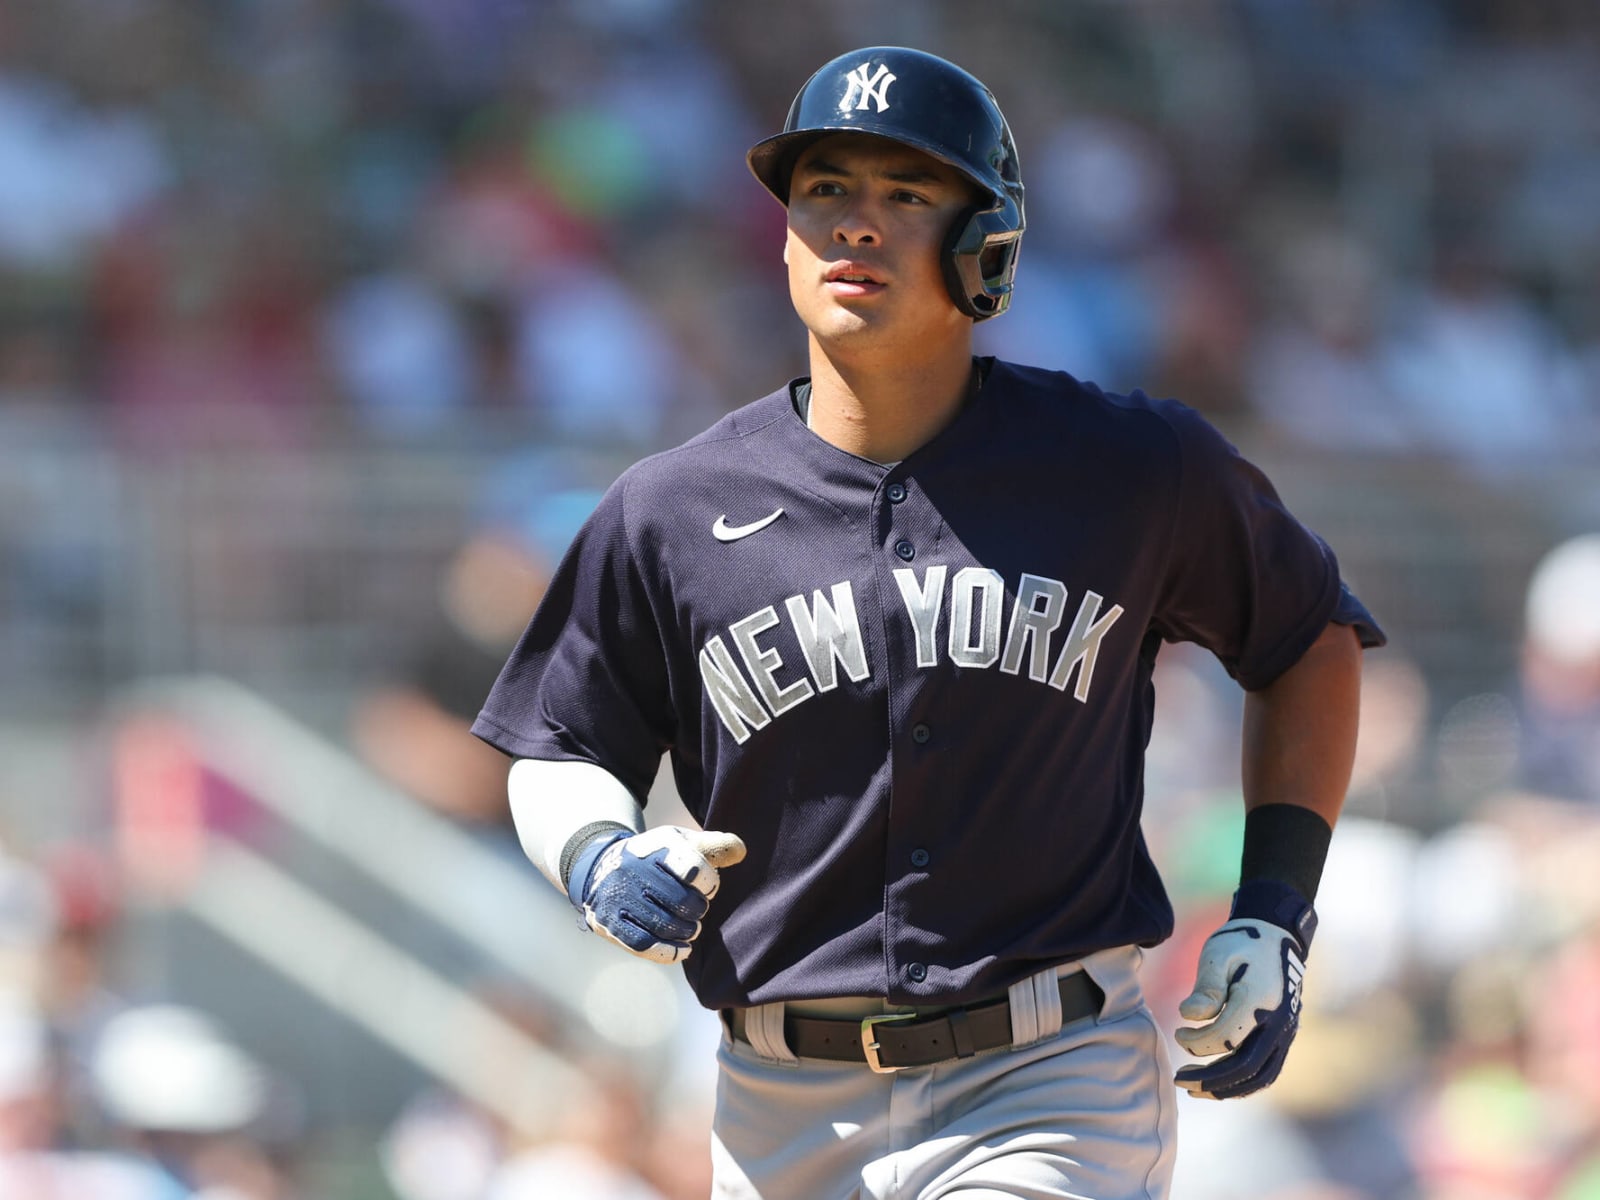 New York Yankees rookie Anthony Volpe chooses No. 11